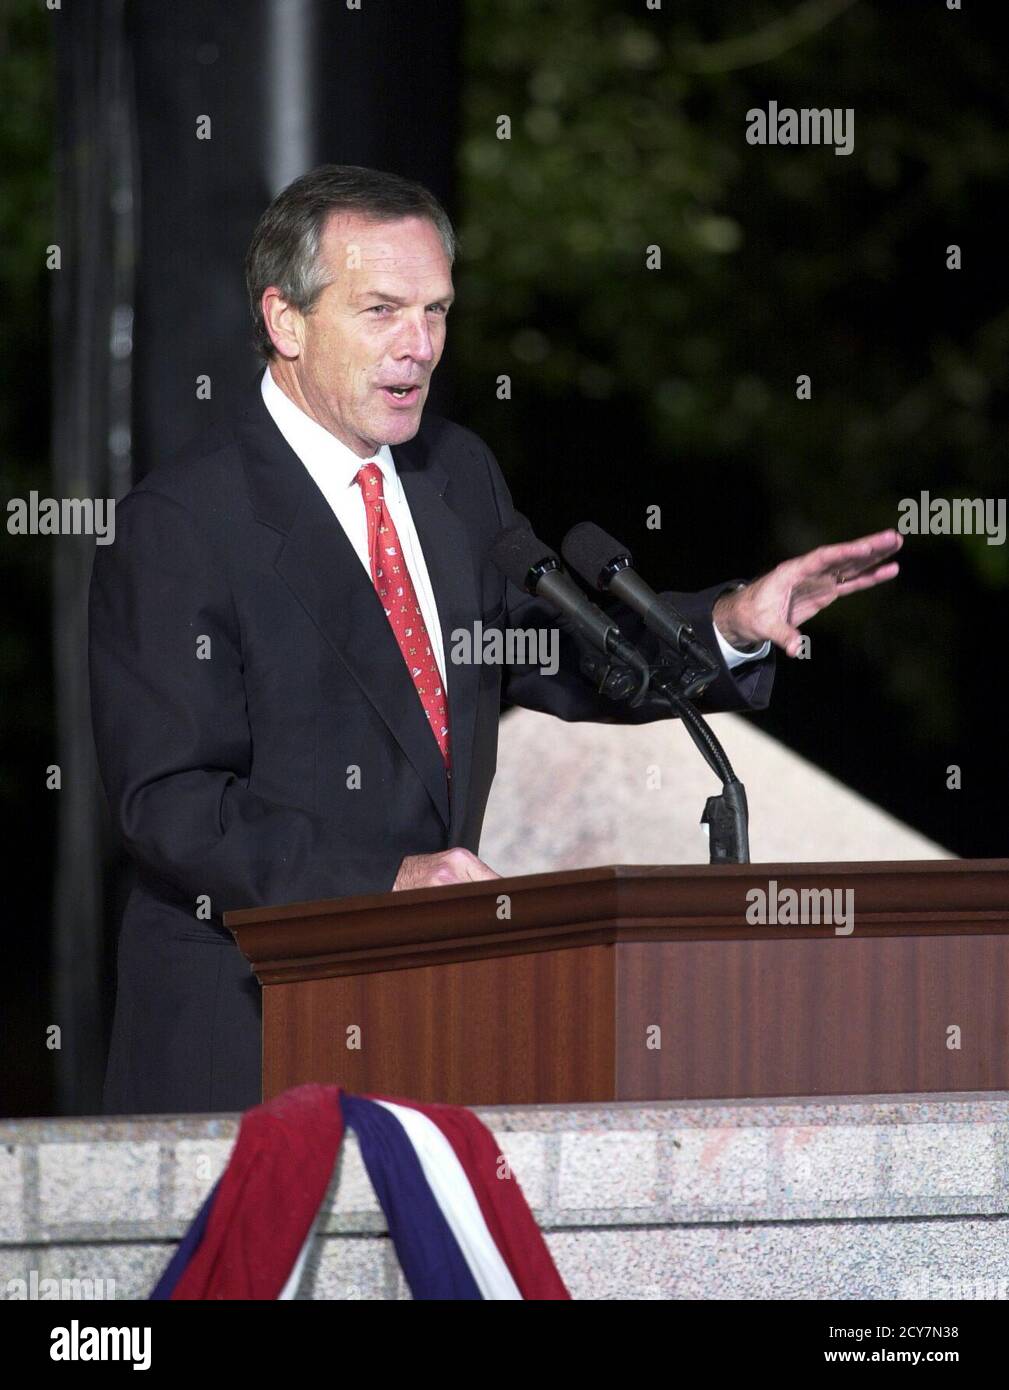 Austin, Texas 08NOV00:  Bush campaign chairman DON EVANS announces on election night that the ongoing downtown rally celebrating George W. Bush's presidential election over opponent Al Gore is over pending the counting of Florida votes in the extremely close race. Stock Photo